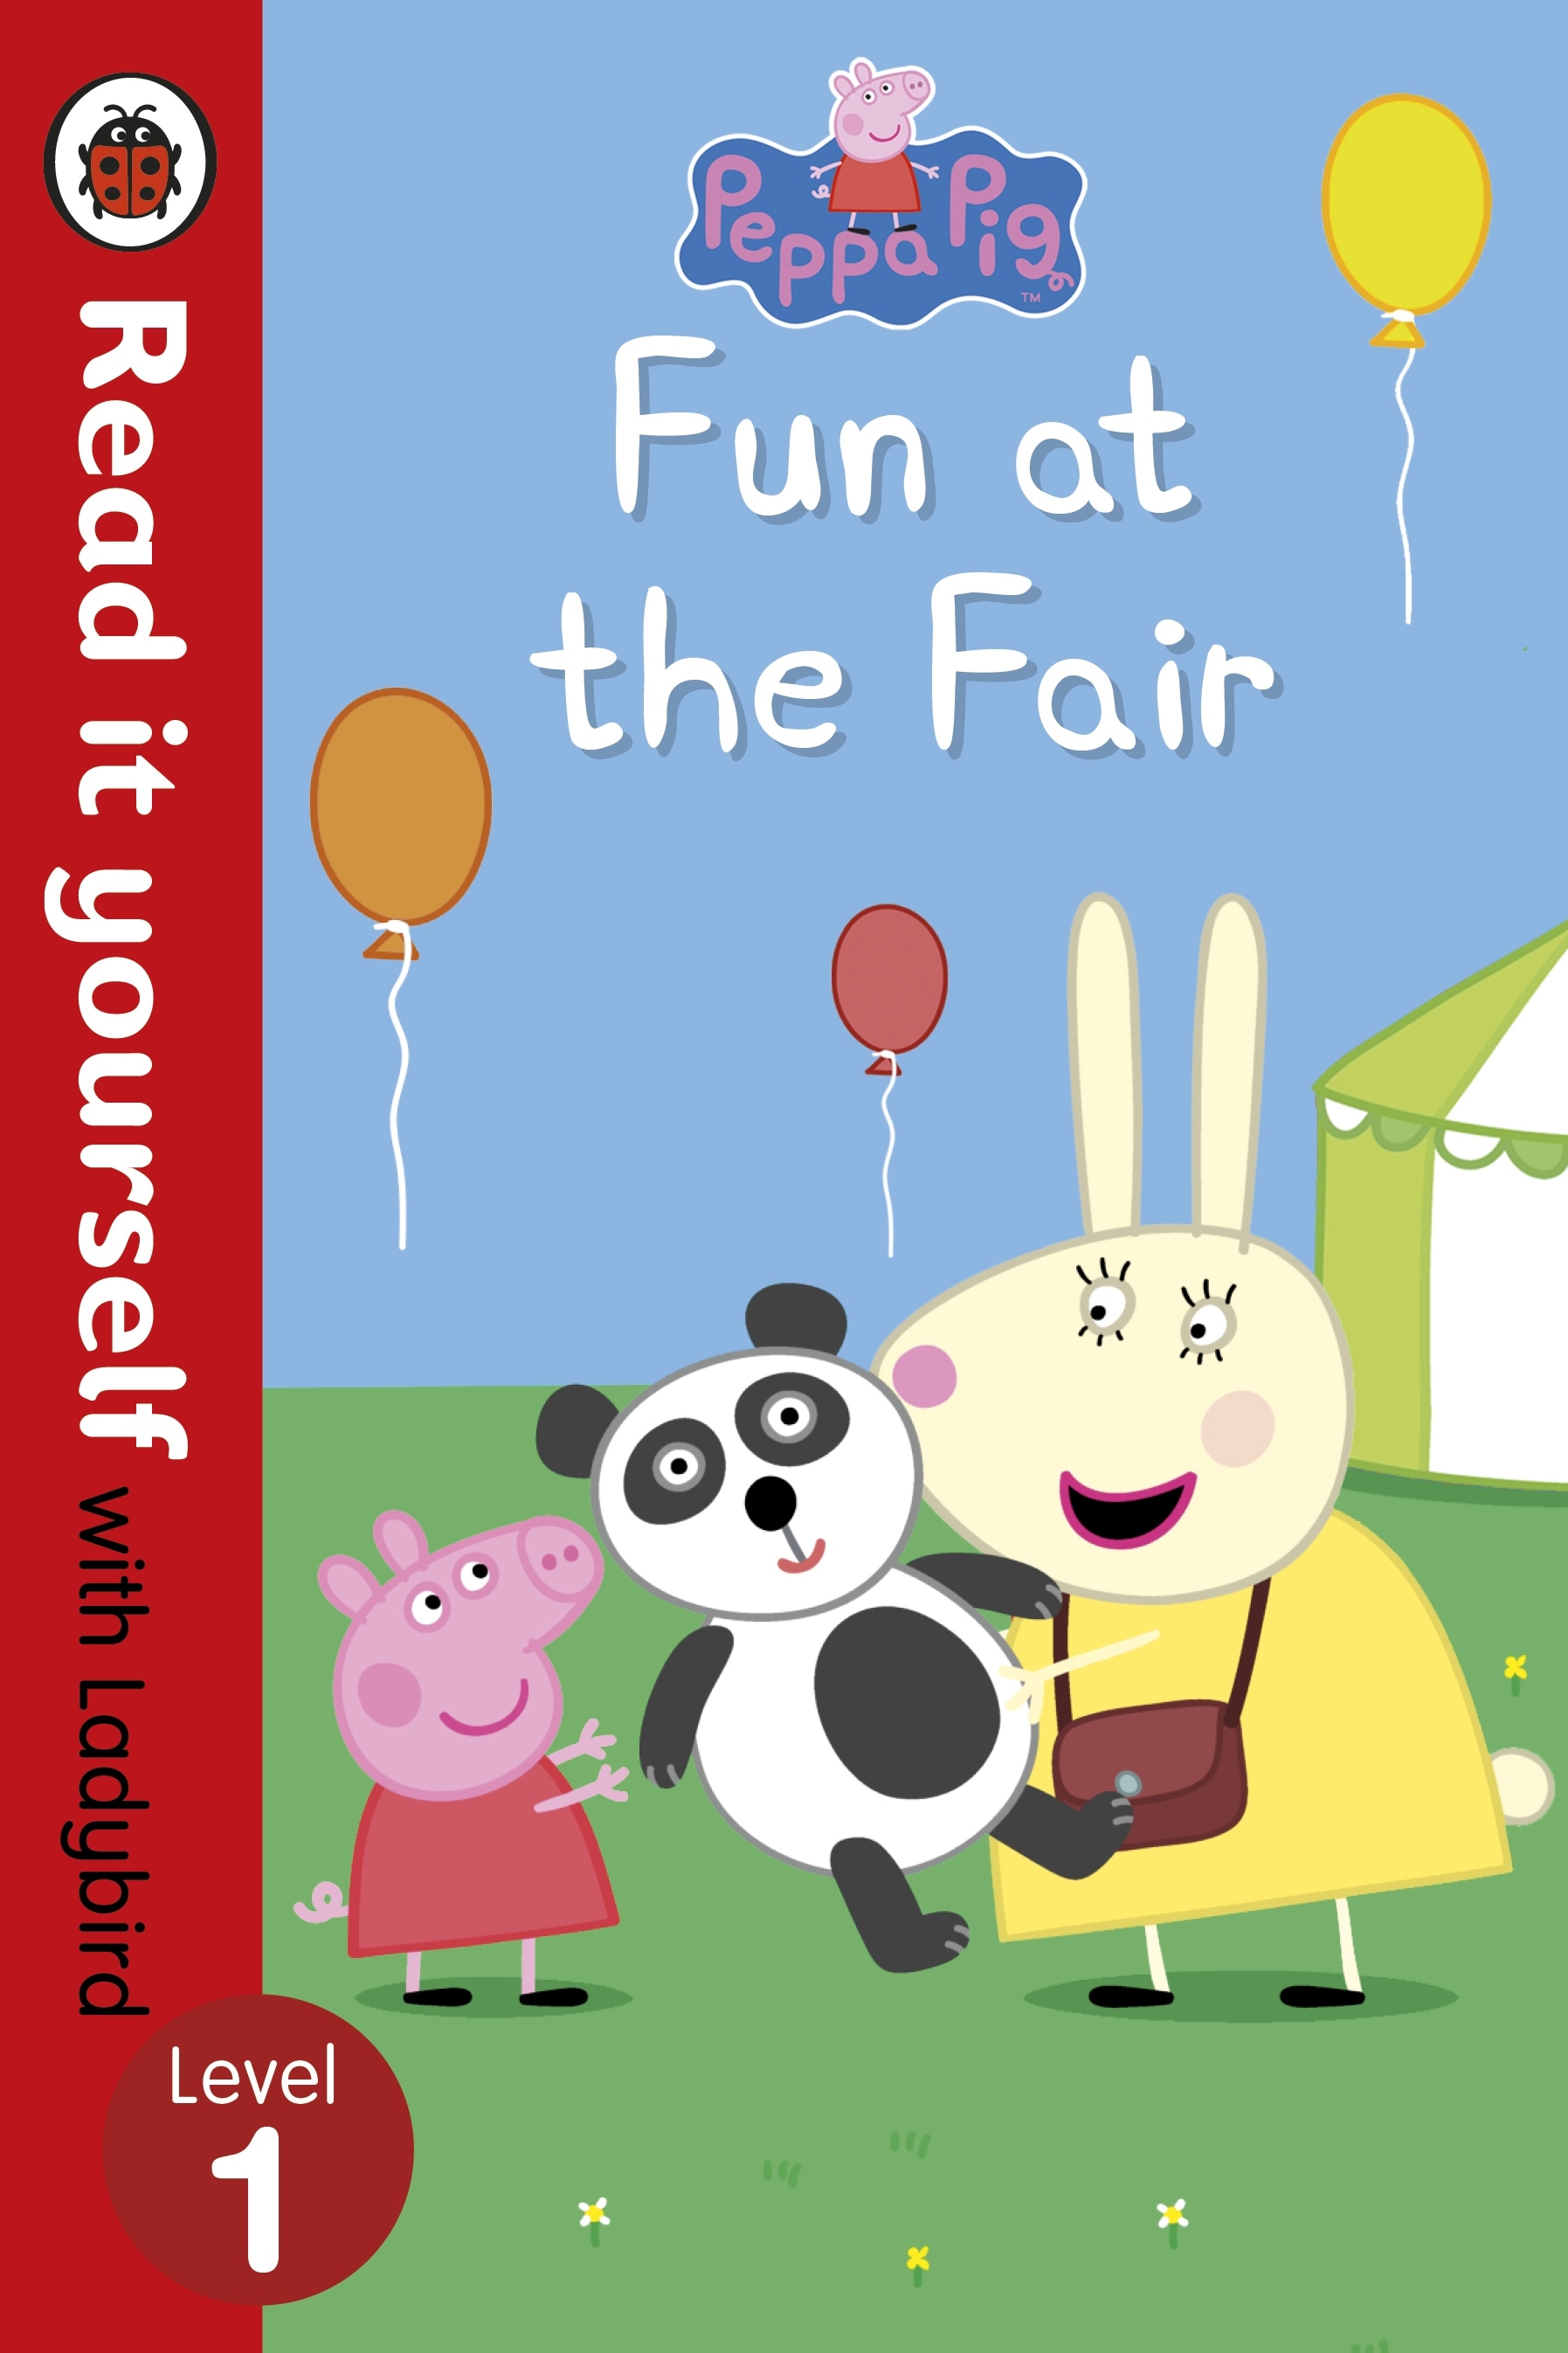 Book “Peppa Pig: Fun at the Fair - Read it yourself with Ladybird” by Ladybird, Peppa Pig — July 2, 2015